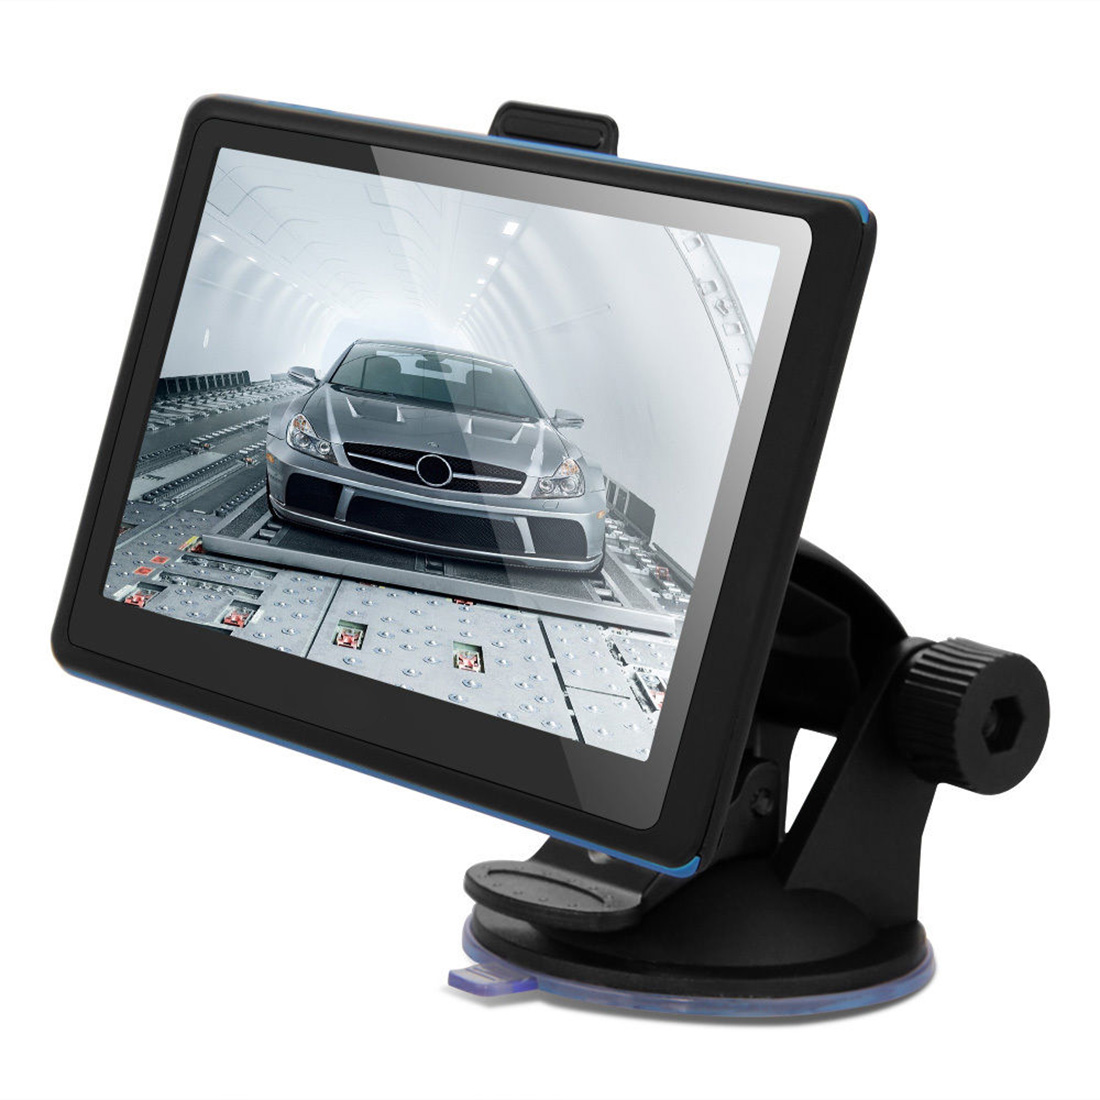 gps 5 inch High Definition Touchscreen Car GPS Navigation With FM Transmission 128MB Graphics Card 8GB